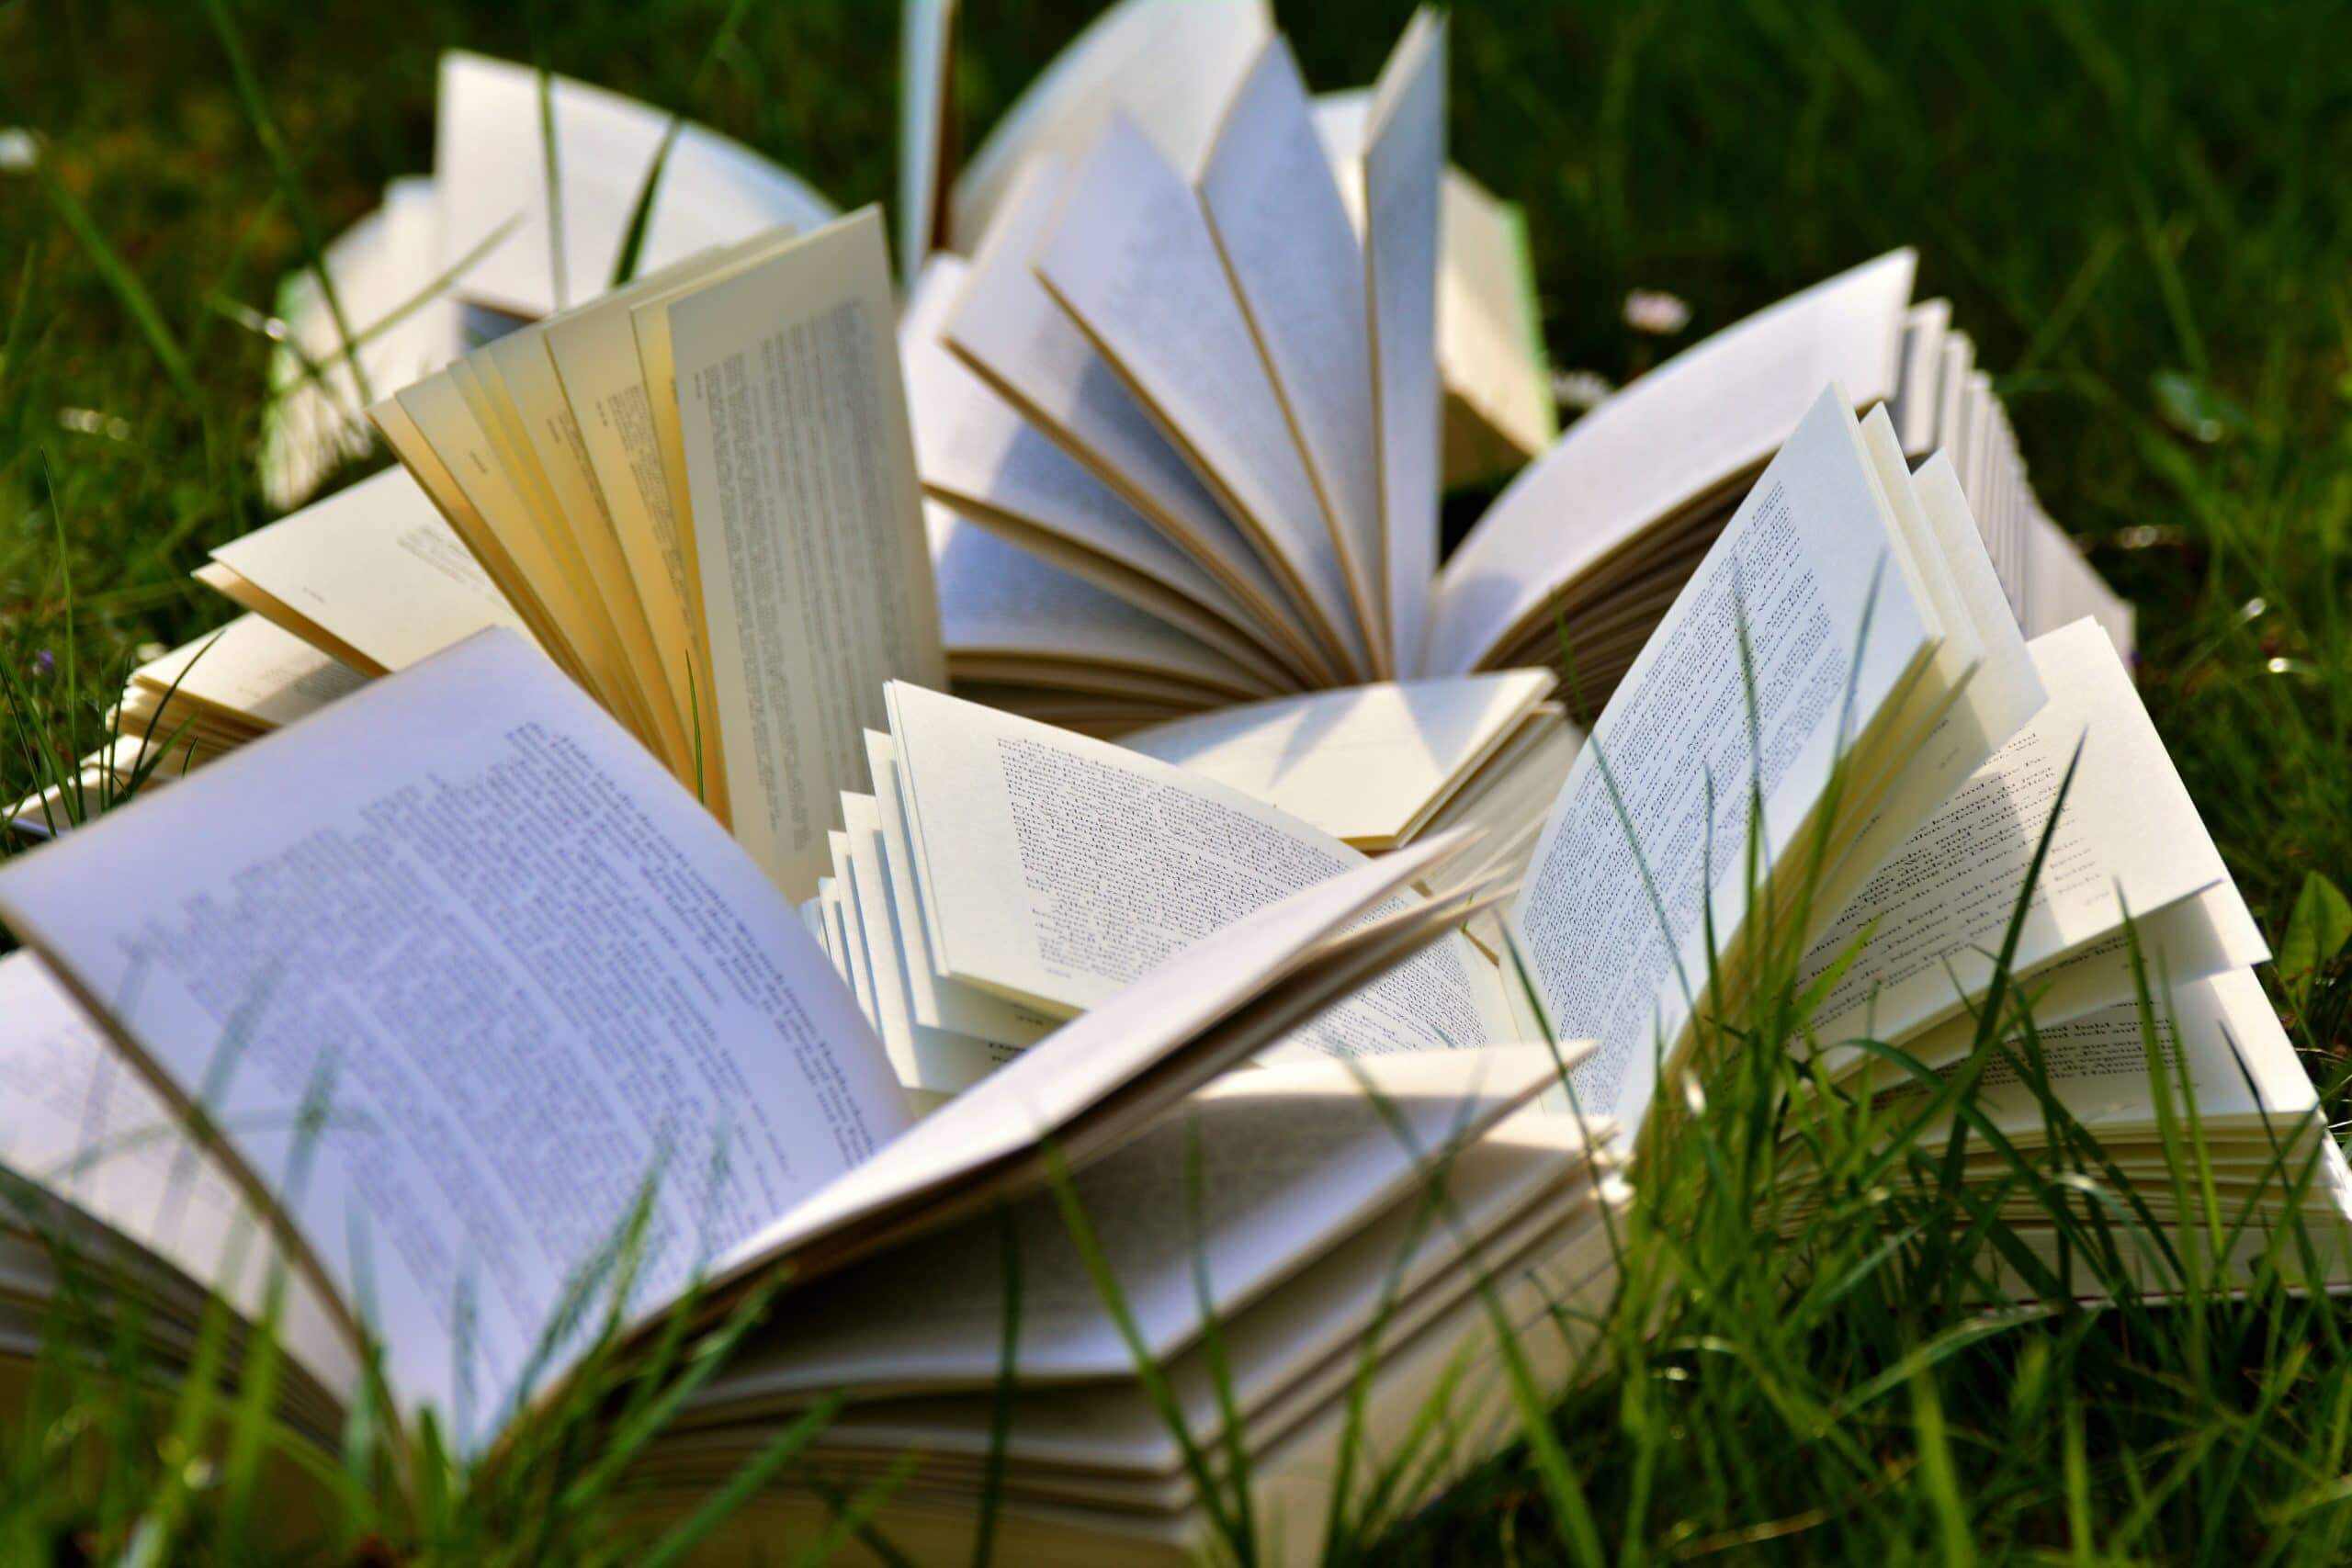 Pile of books on the grass